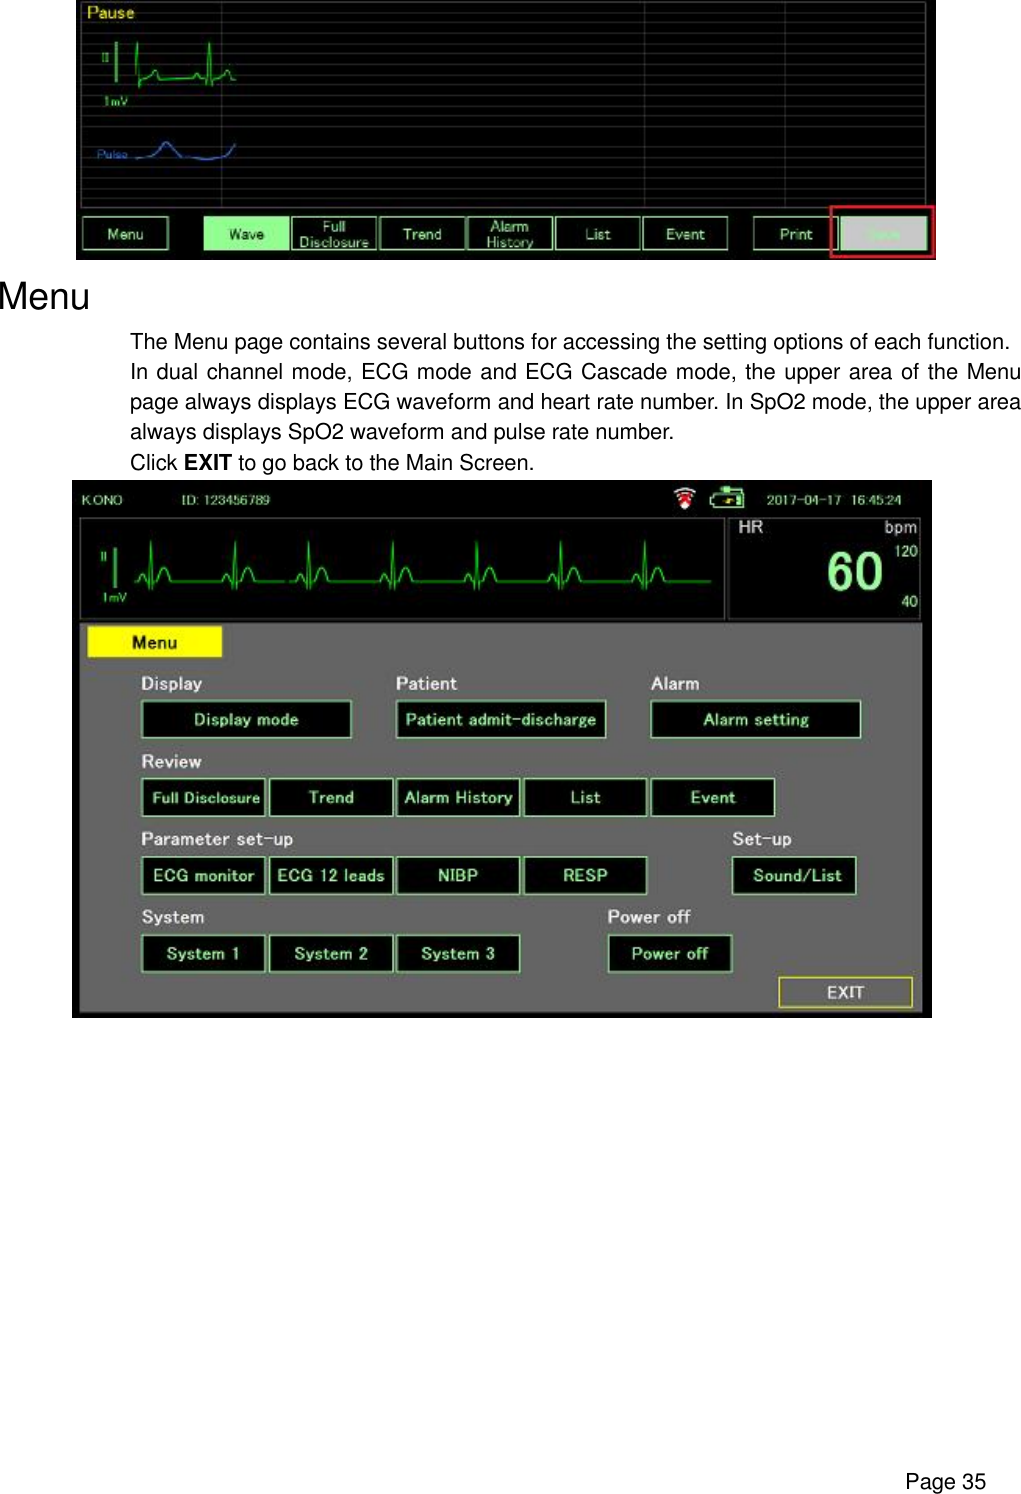      Page 35   Menu The Menu page contains several buttons for accessing the setting options of each function. In dual channel mode, ECG mode and ECG Cascade mode, the upper area of the Menu page always displays ECG waveform and heart rate number. In SpO2 mode, the upper area always displays SpO2 waveform and pulse rate number. Click EXIT to go back to the Main Screen.    